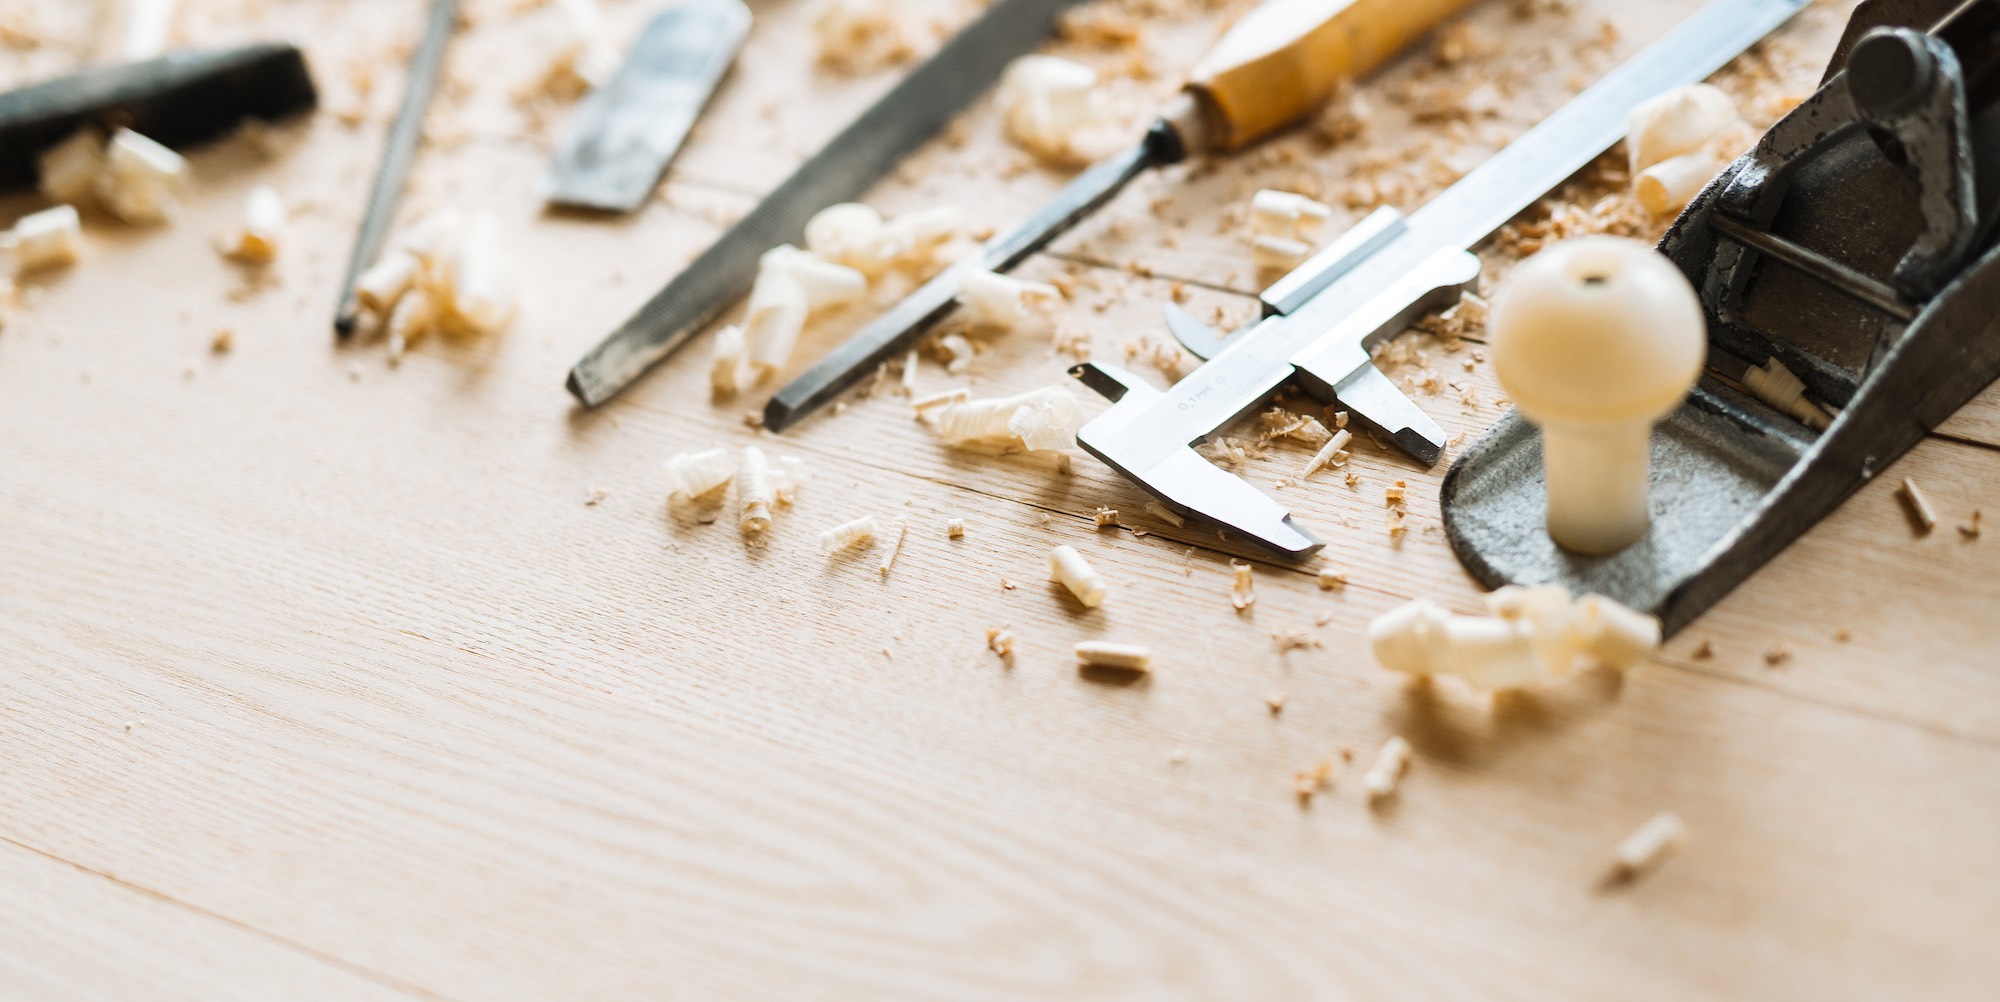 An Overview on DIY Woodworking